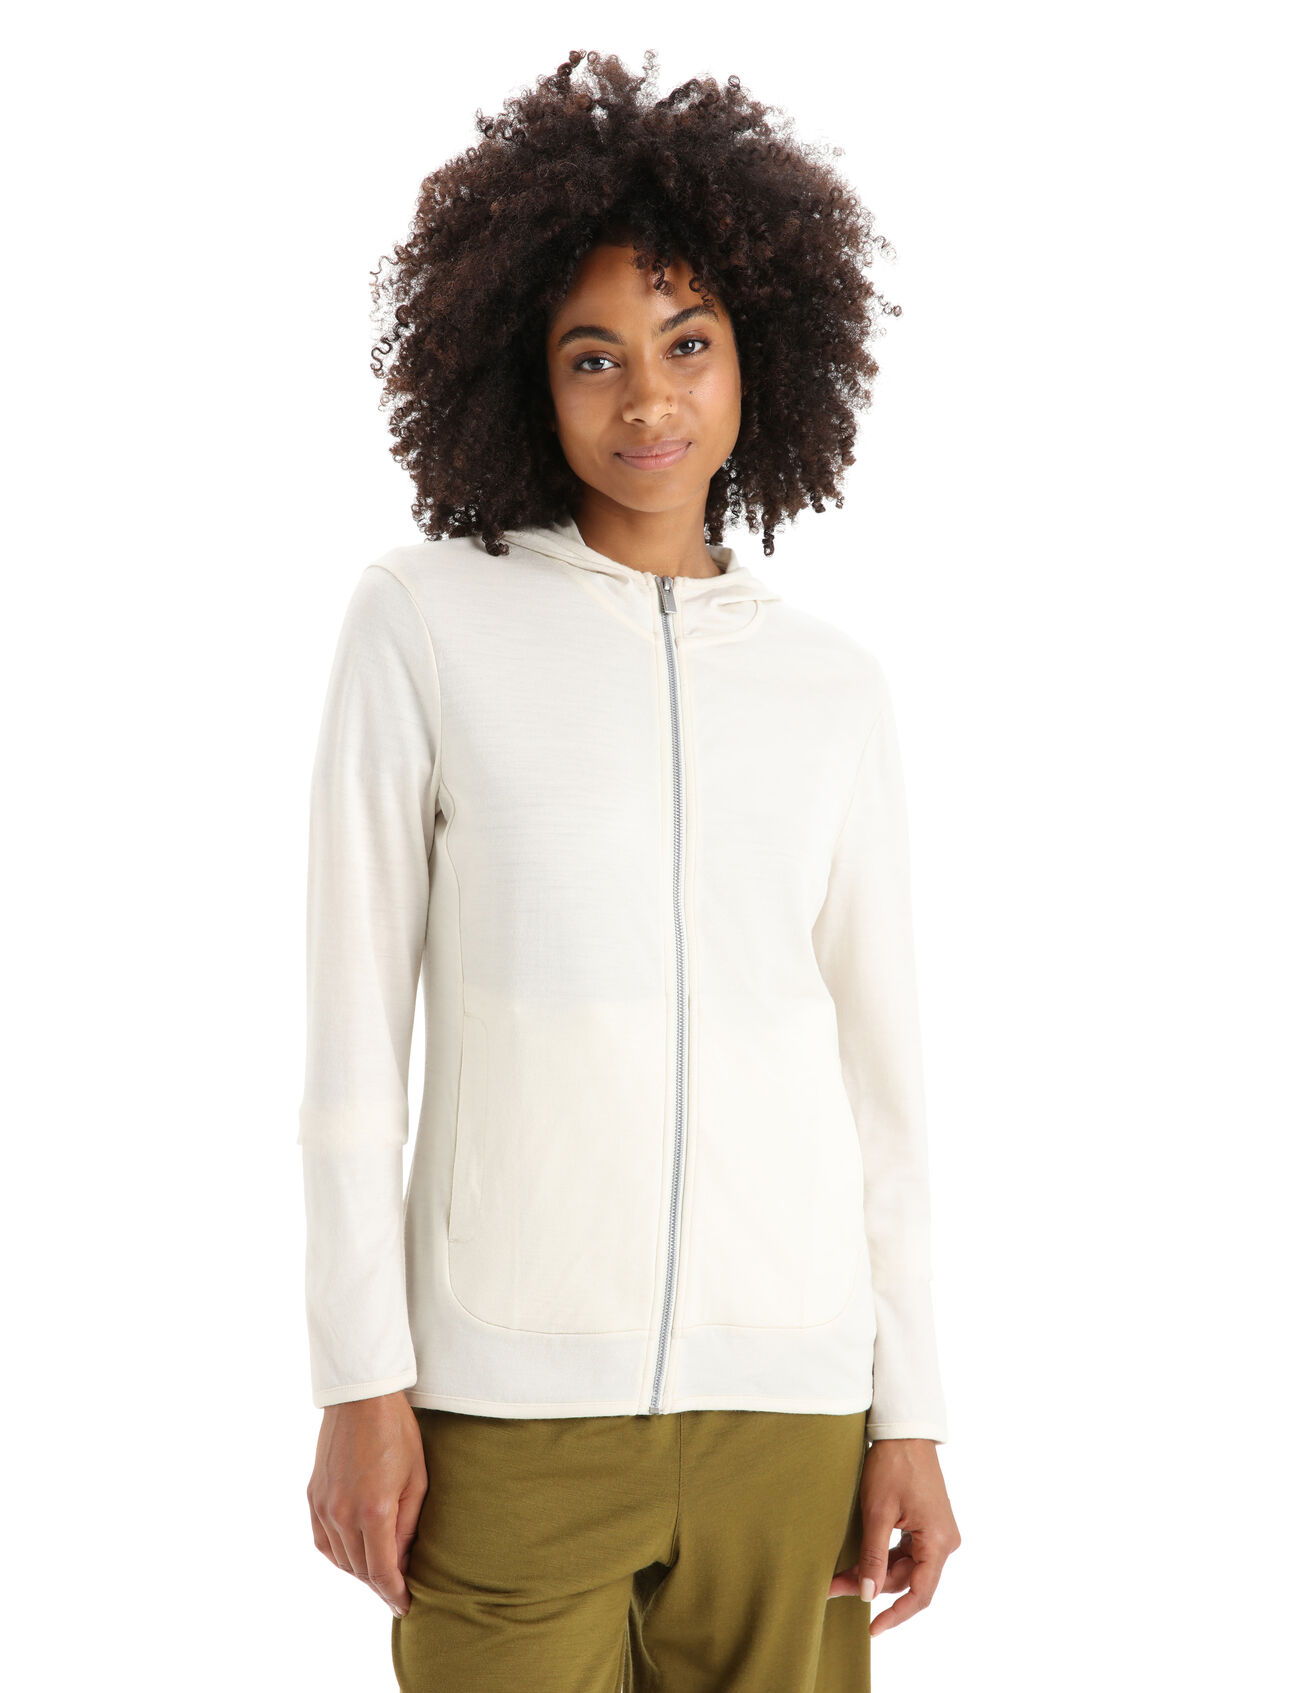 Womens Merino Granary Long Sleeve Zip Hoodie A lightweight everyday hoodie perfect for down-time in town or exploring the outdoors, the Granary Long Sleeve Zip Hoodie is loaded with natural style and breathable comfort thanks to 100% merino wool fabric.